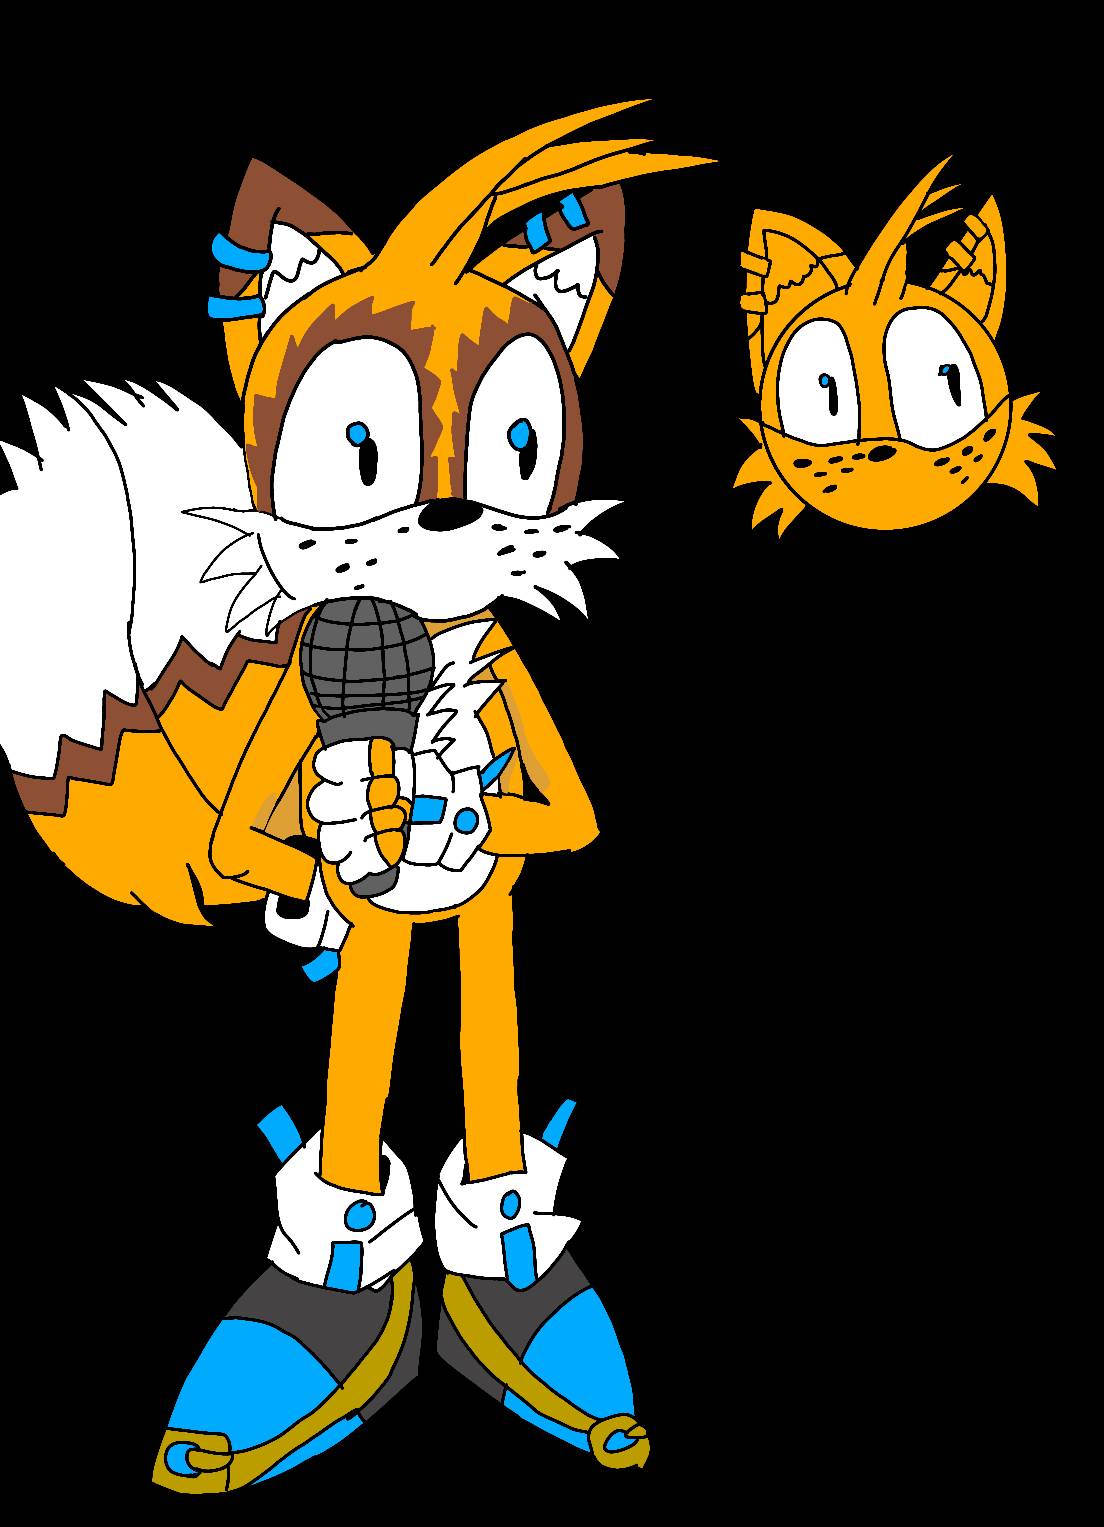 Minecraft-Tails.Exe:Help Me by SonicEXEGod on DeviantArt